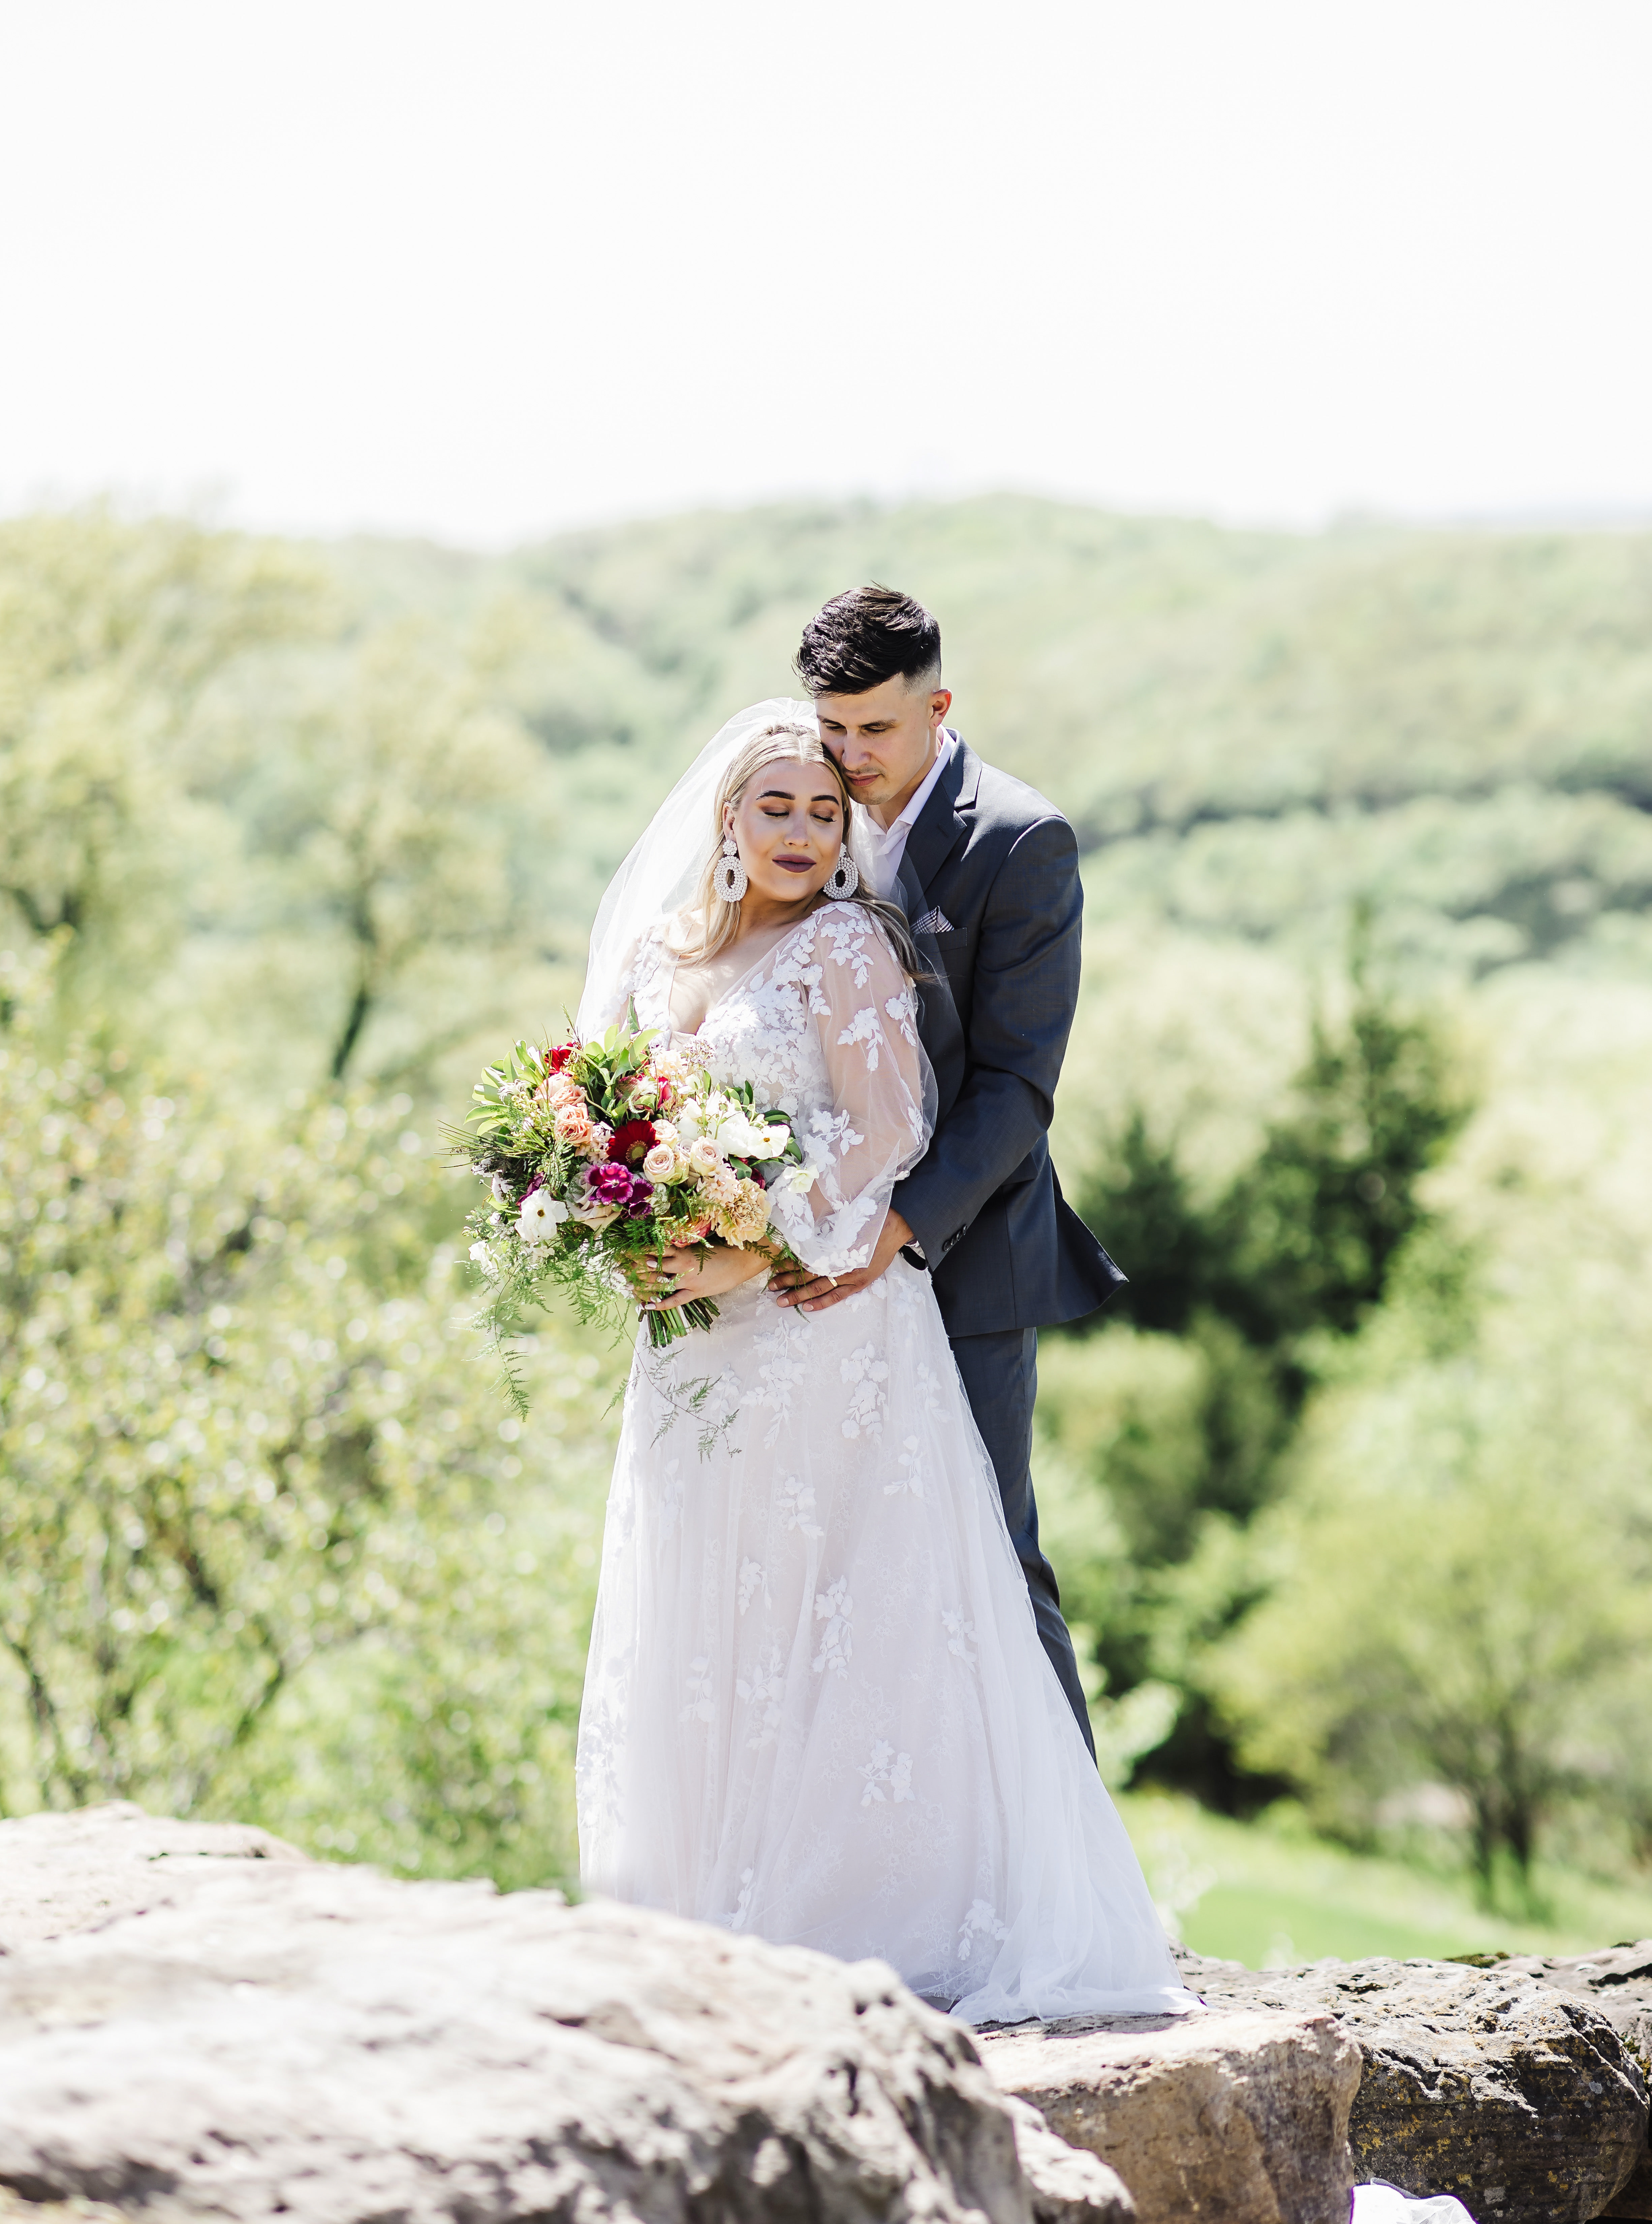 Bride and groom intimate photography captured by Tatyana Zadorin 